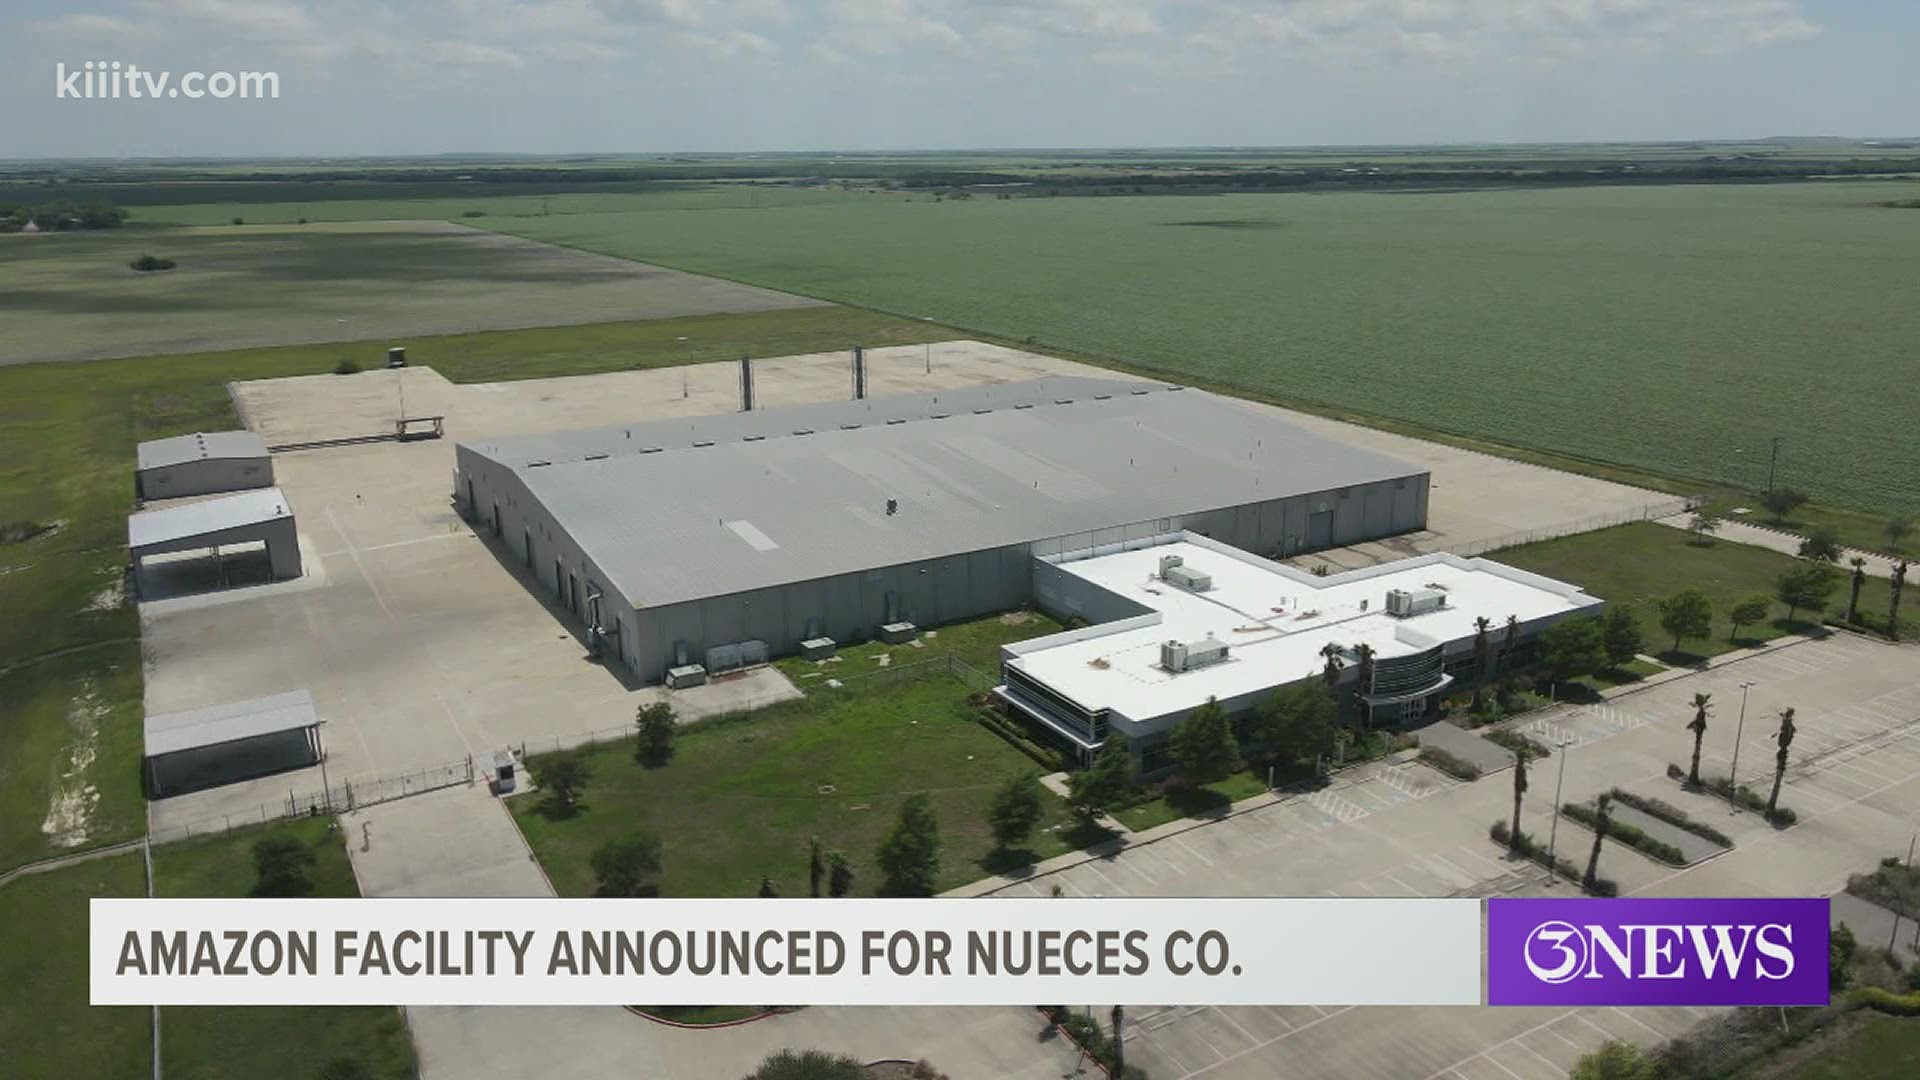 The new hub, called the Last Mile Facility, is expected to be running by late 2021 and will create about 100 jobs with minimum starting wage at $15 an hour.